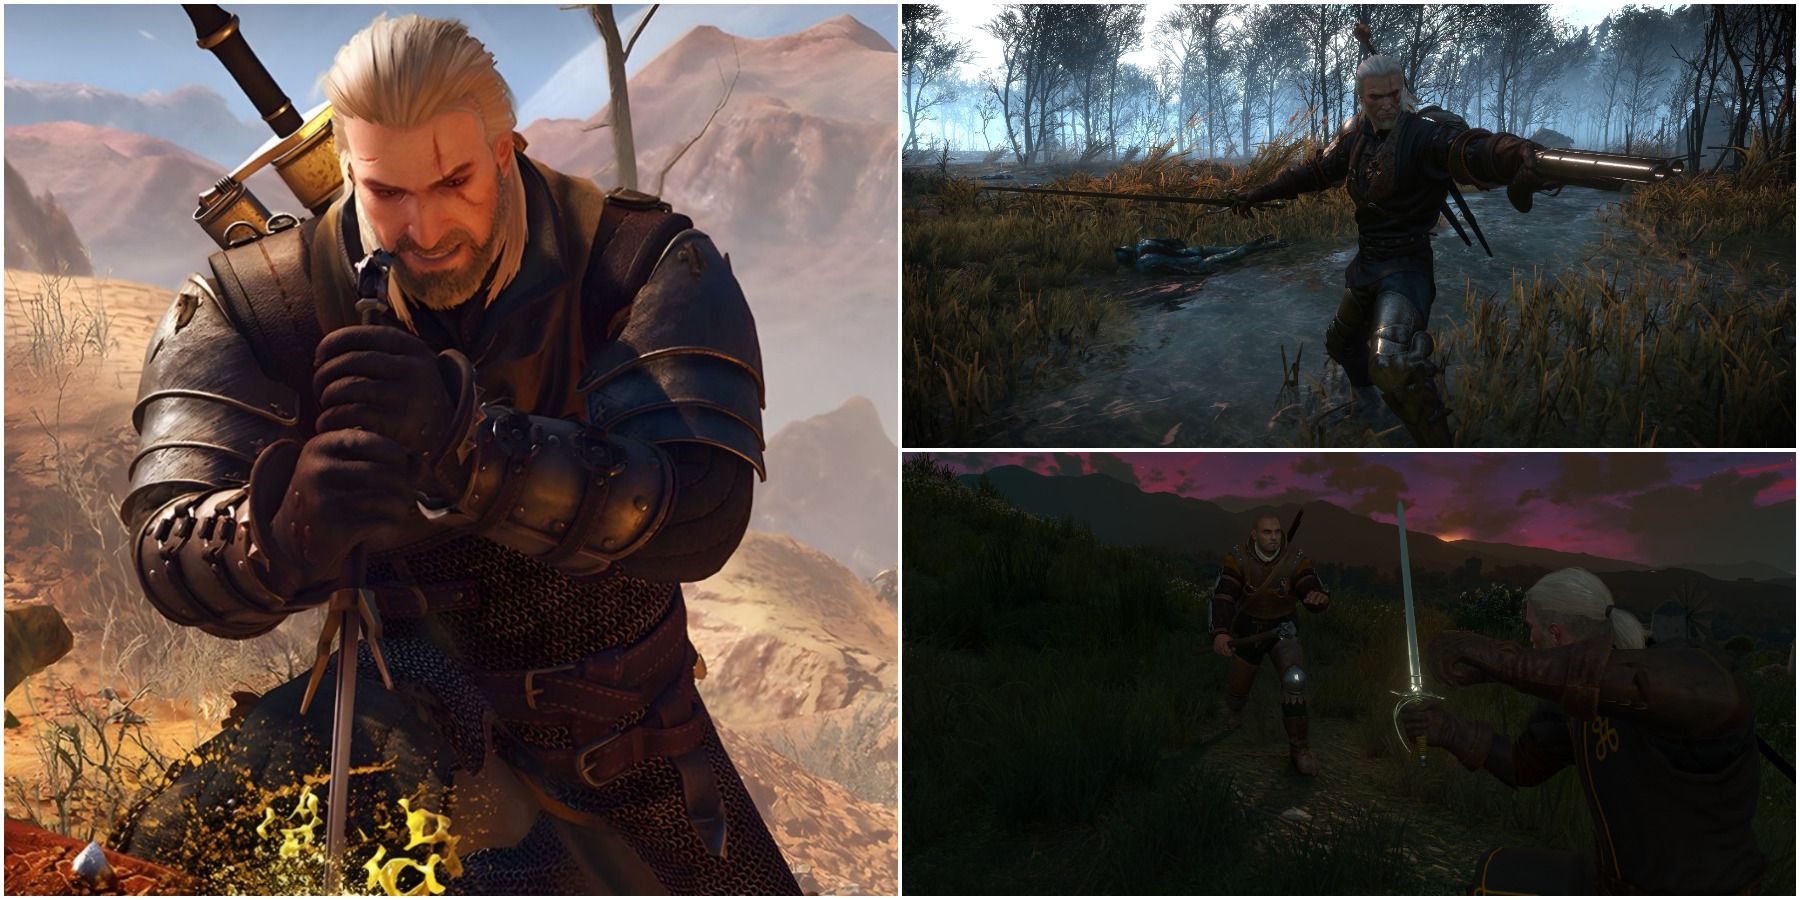 The Witcher 1 Geralt shaved at The Witcher 3 Nexus - Mods and community